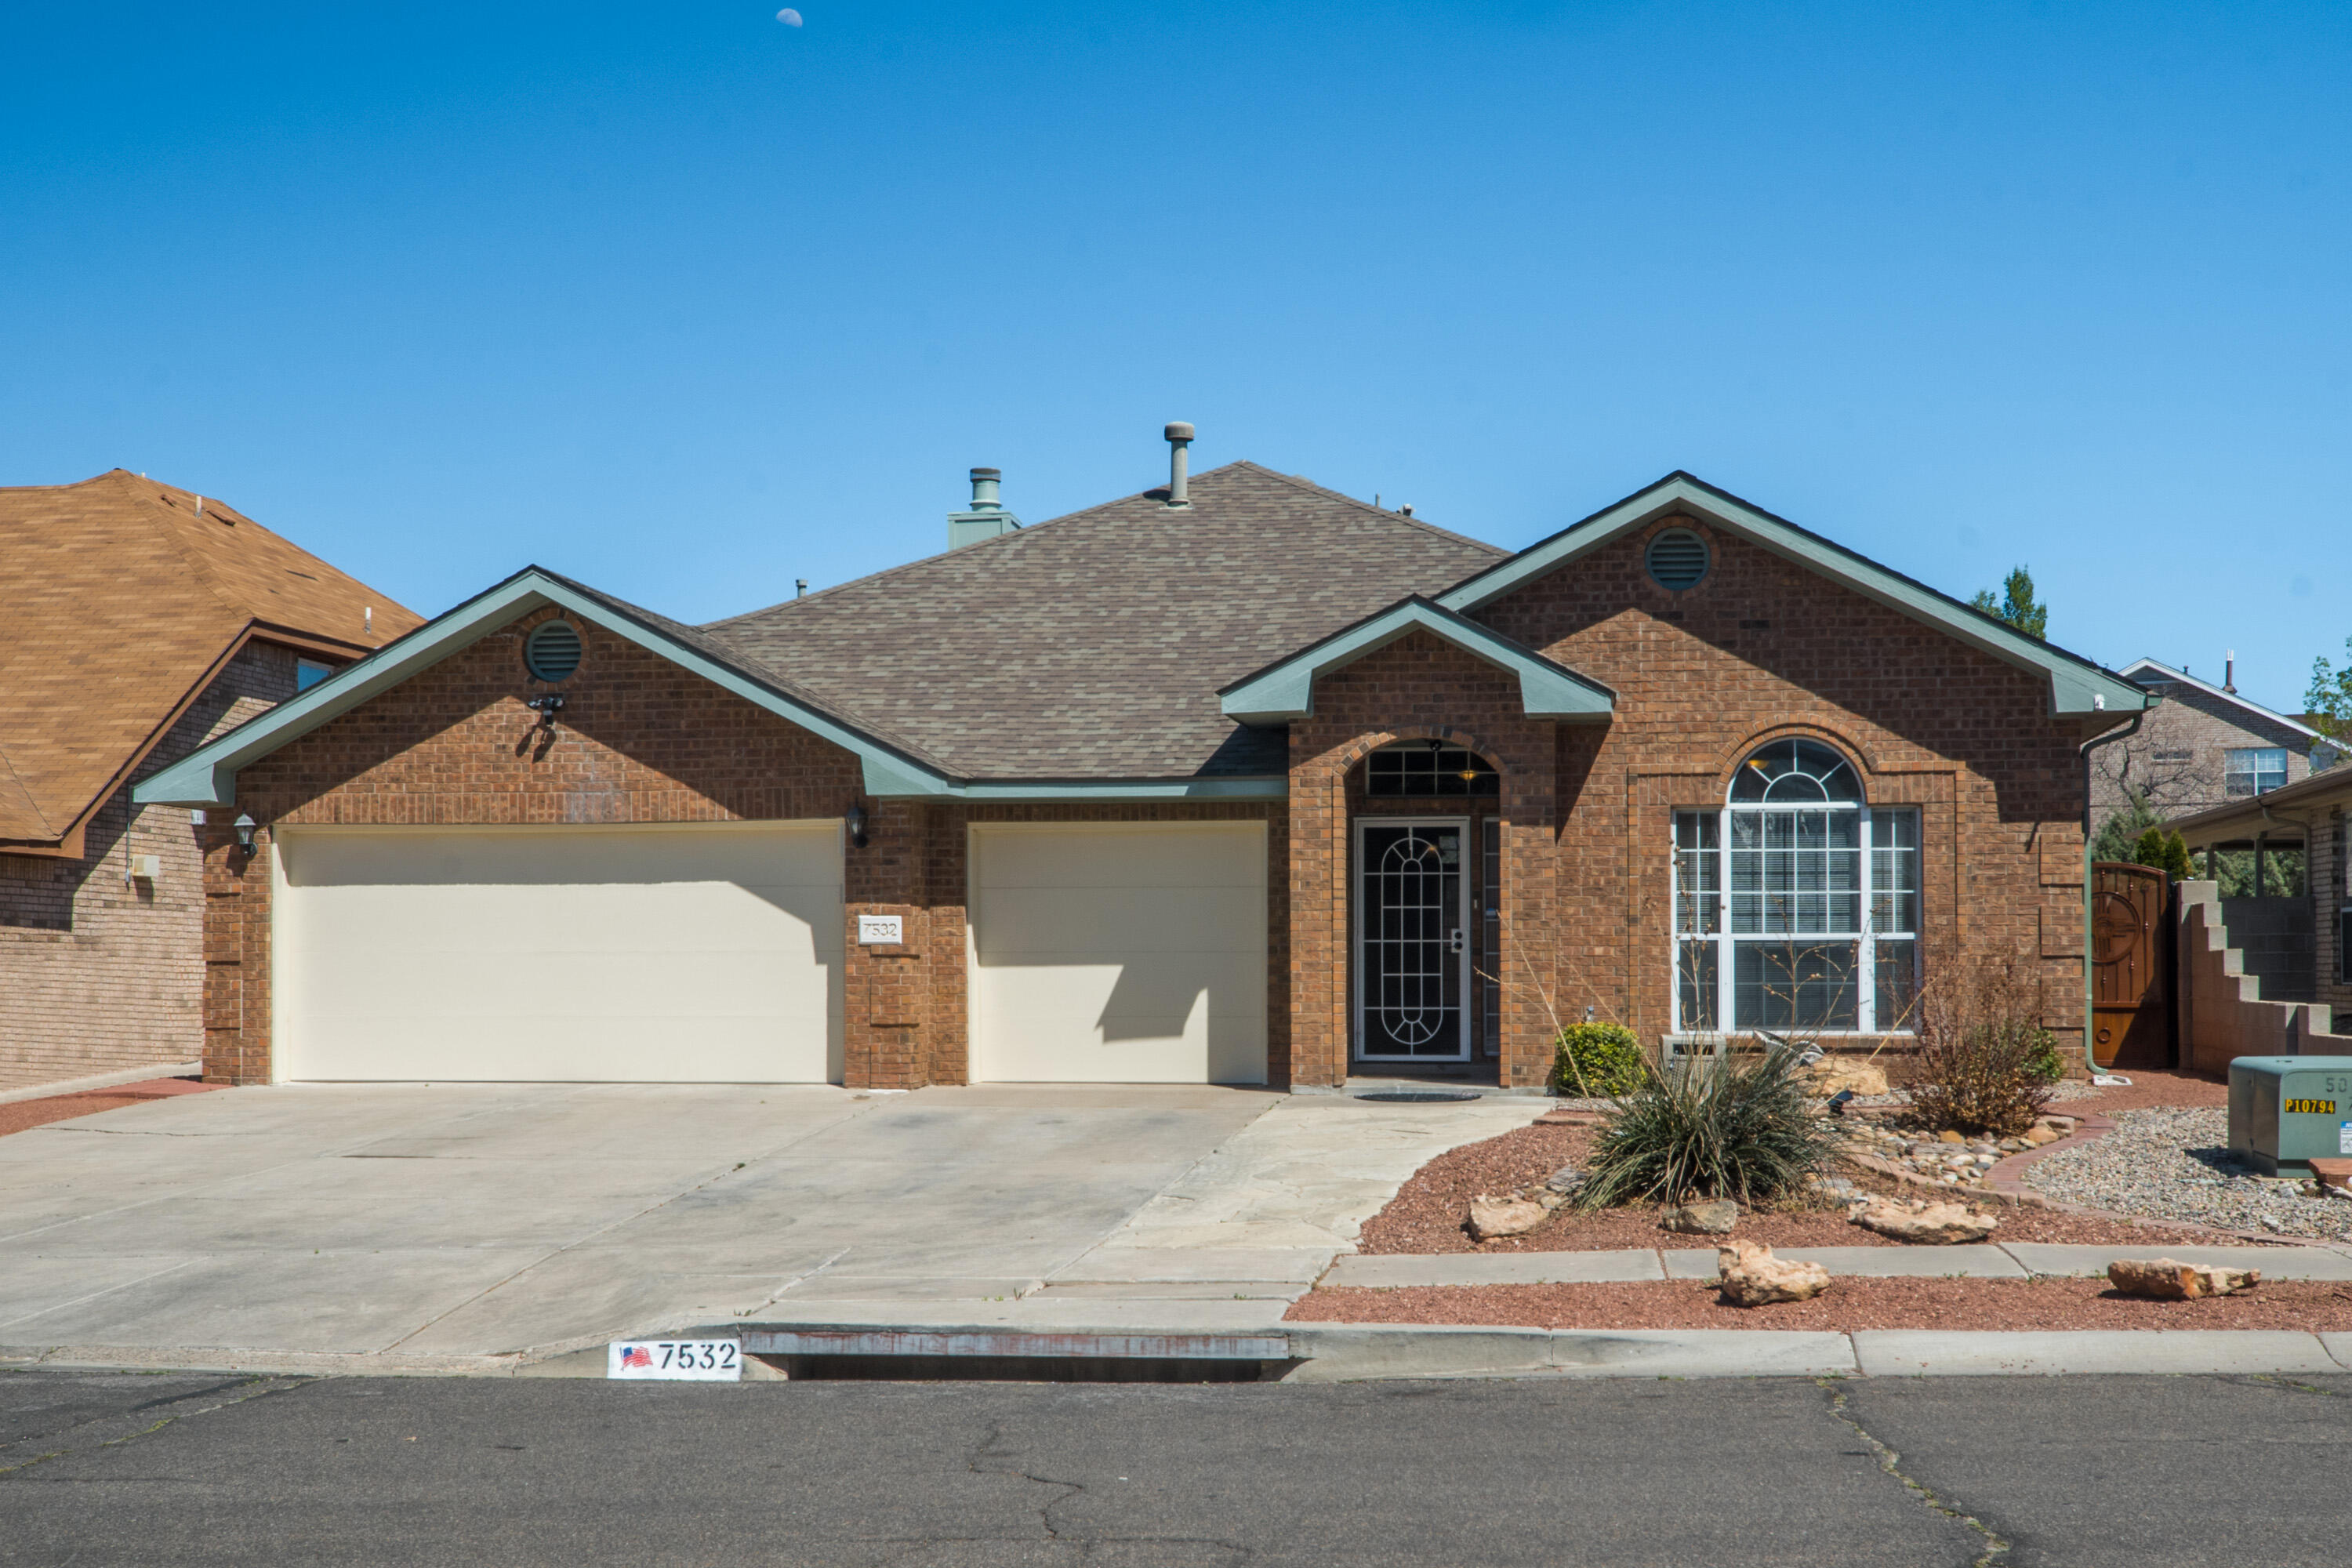 7532 Rosette Drive NW, Albuquerque, New Mexico 87120, 4 Bedrooms Bedrooms, ,3 BathroomsBathrooms,Residential,For Sale,7532 Rosette Drive NW,1060916